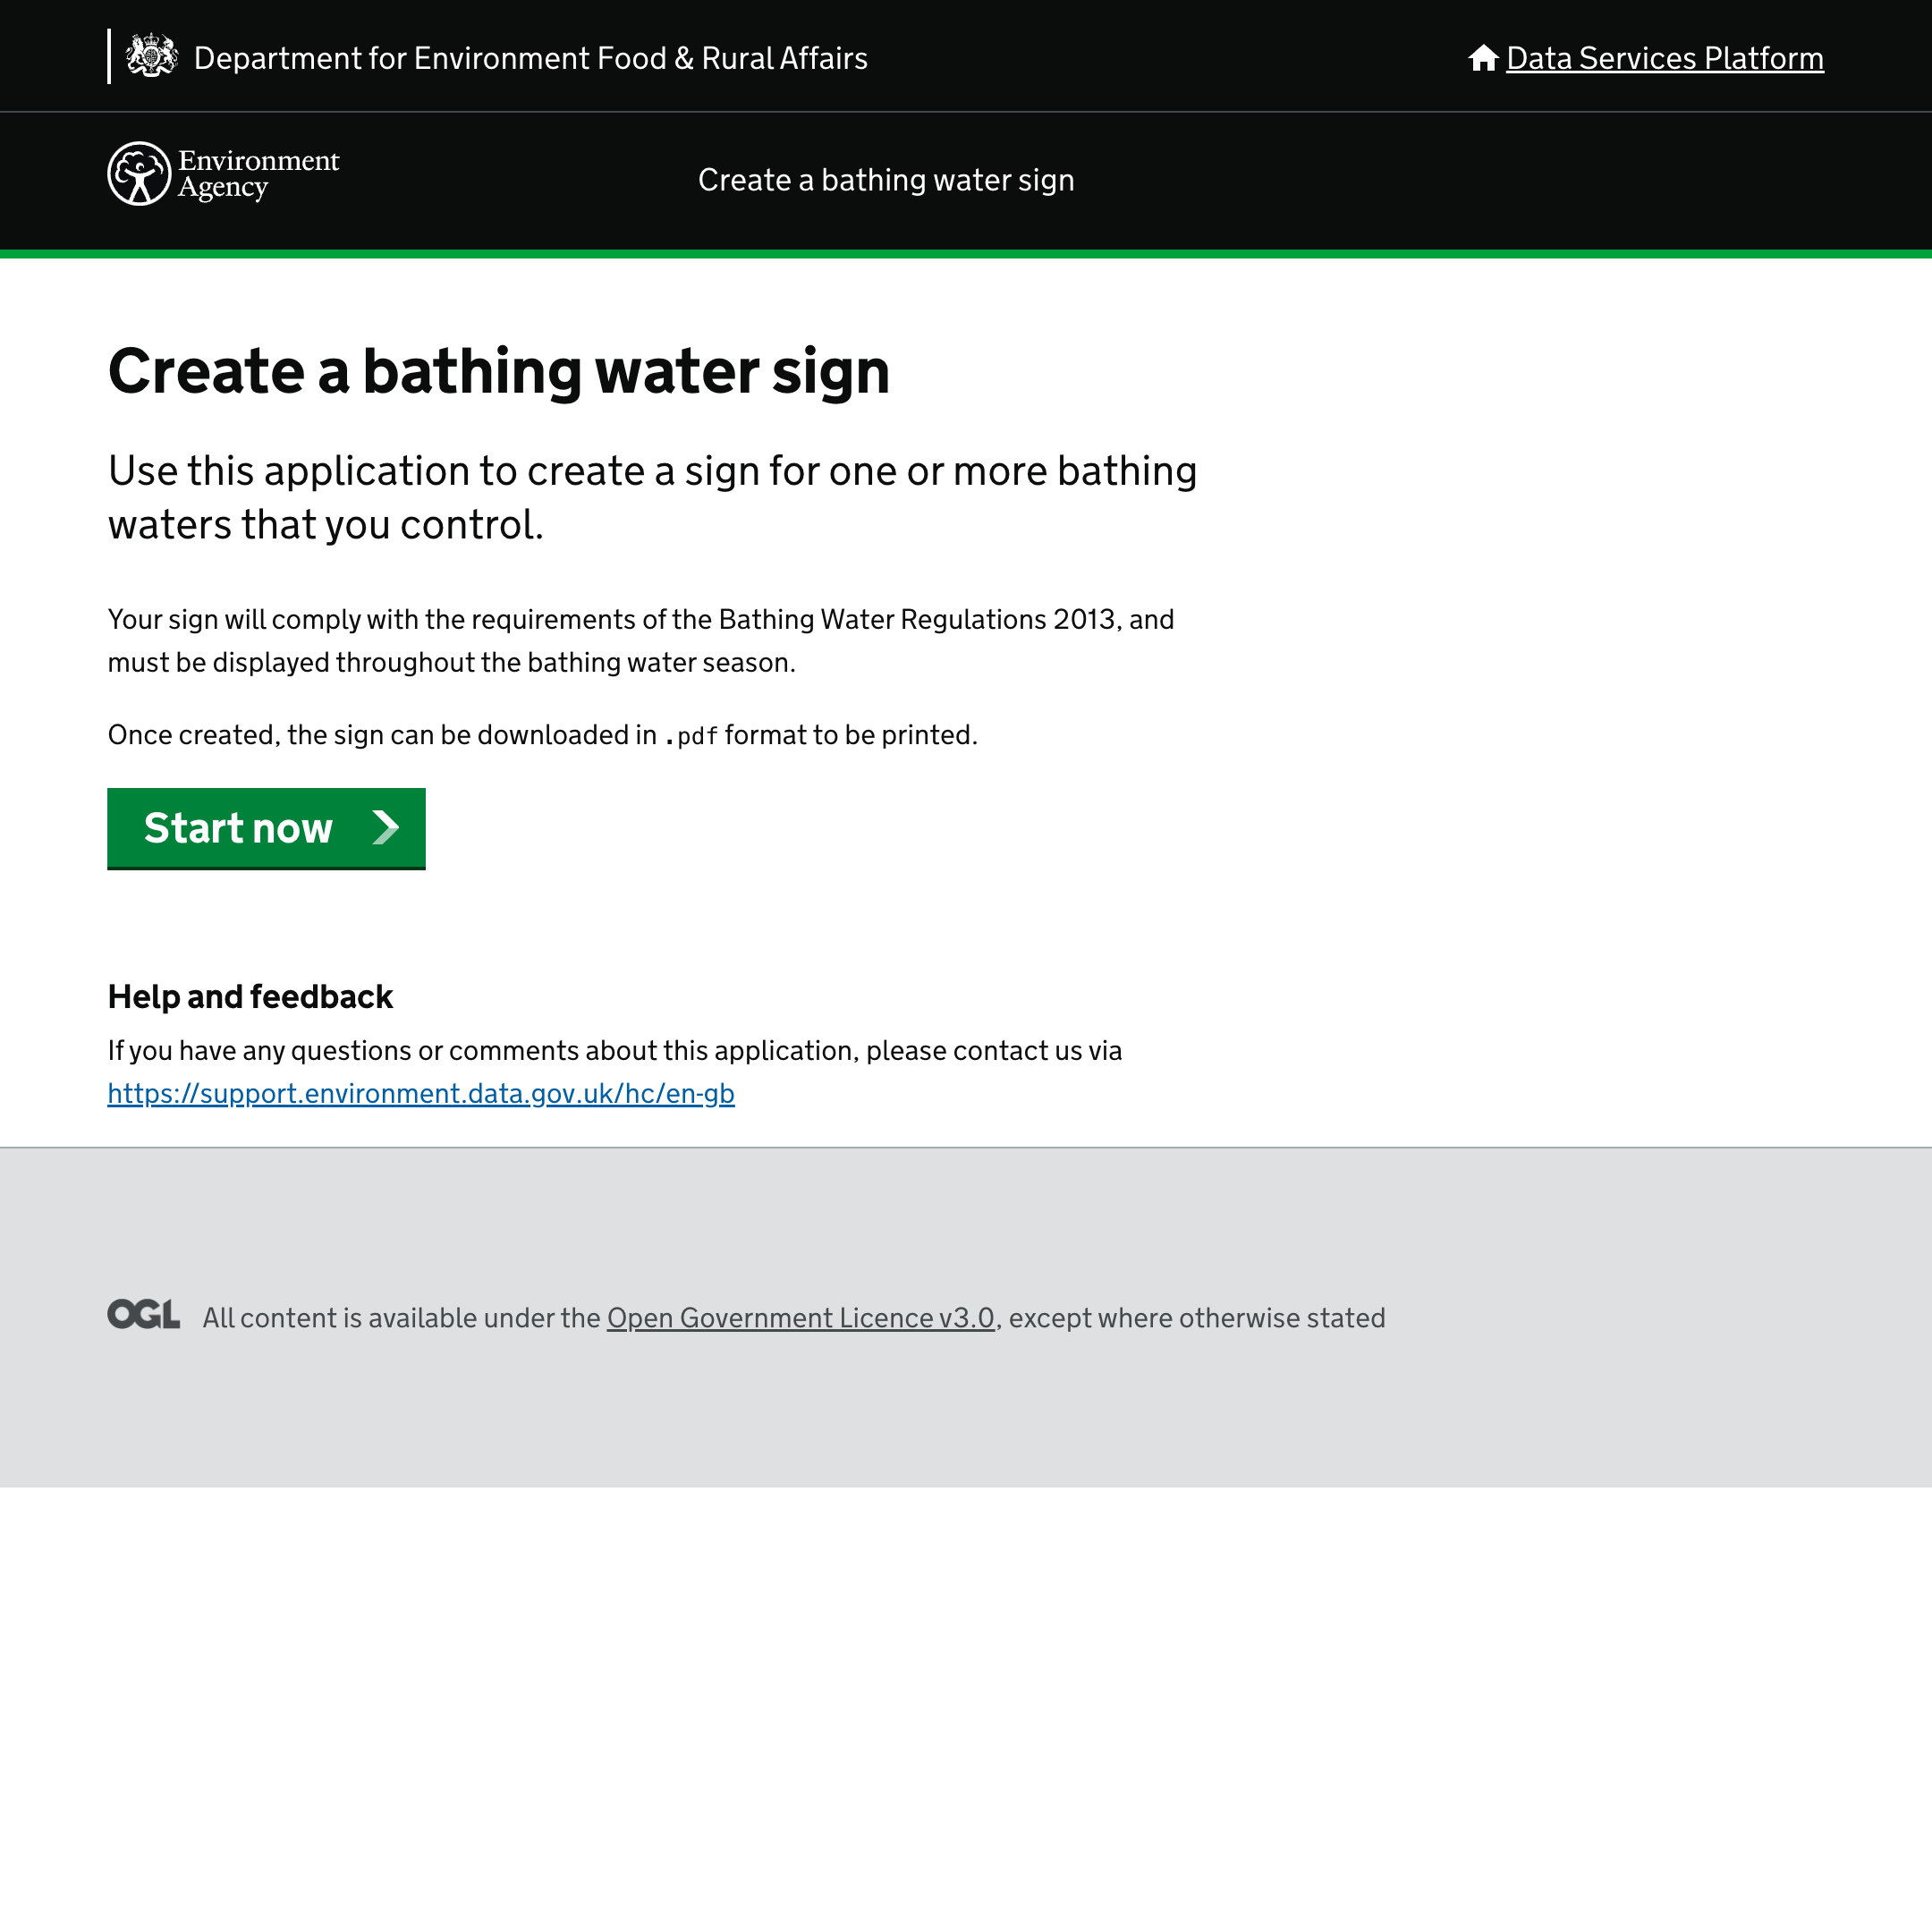 Create a bathing water sign